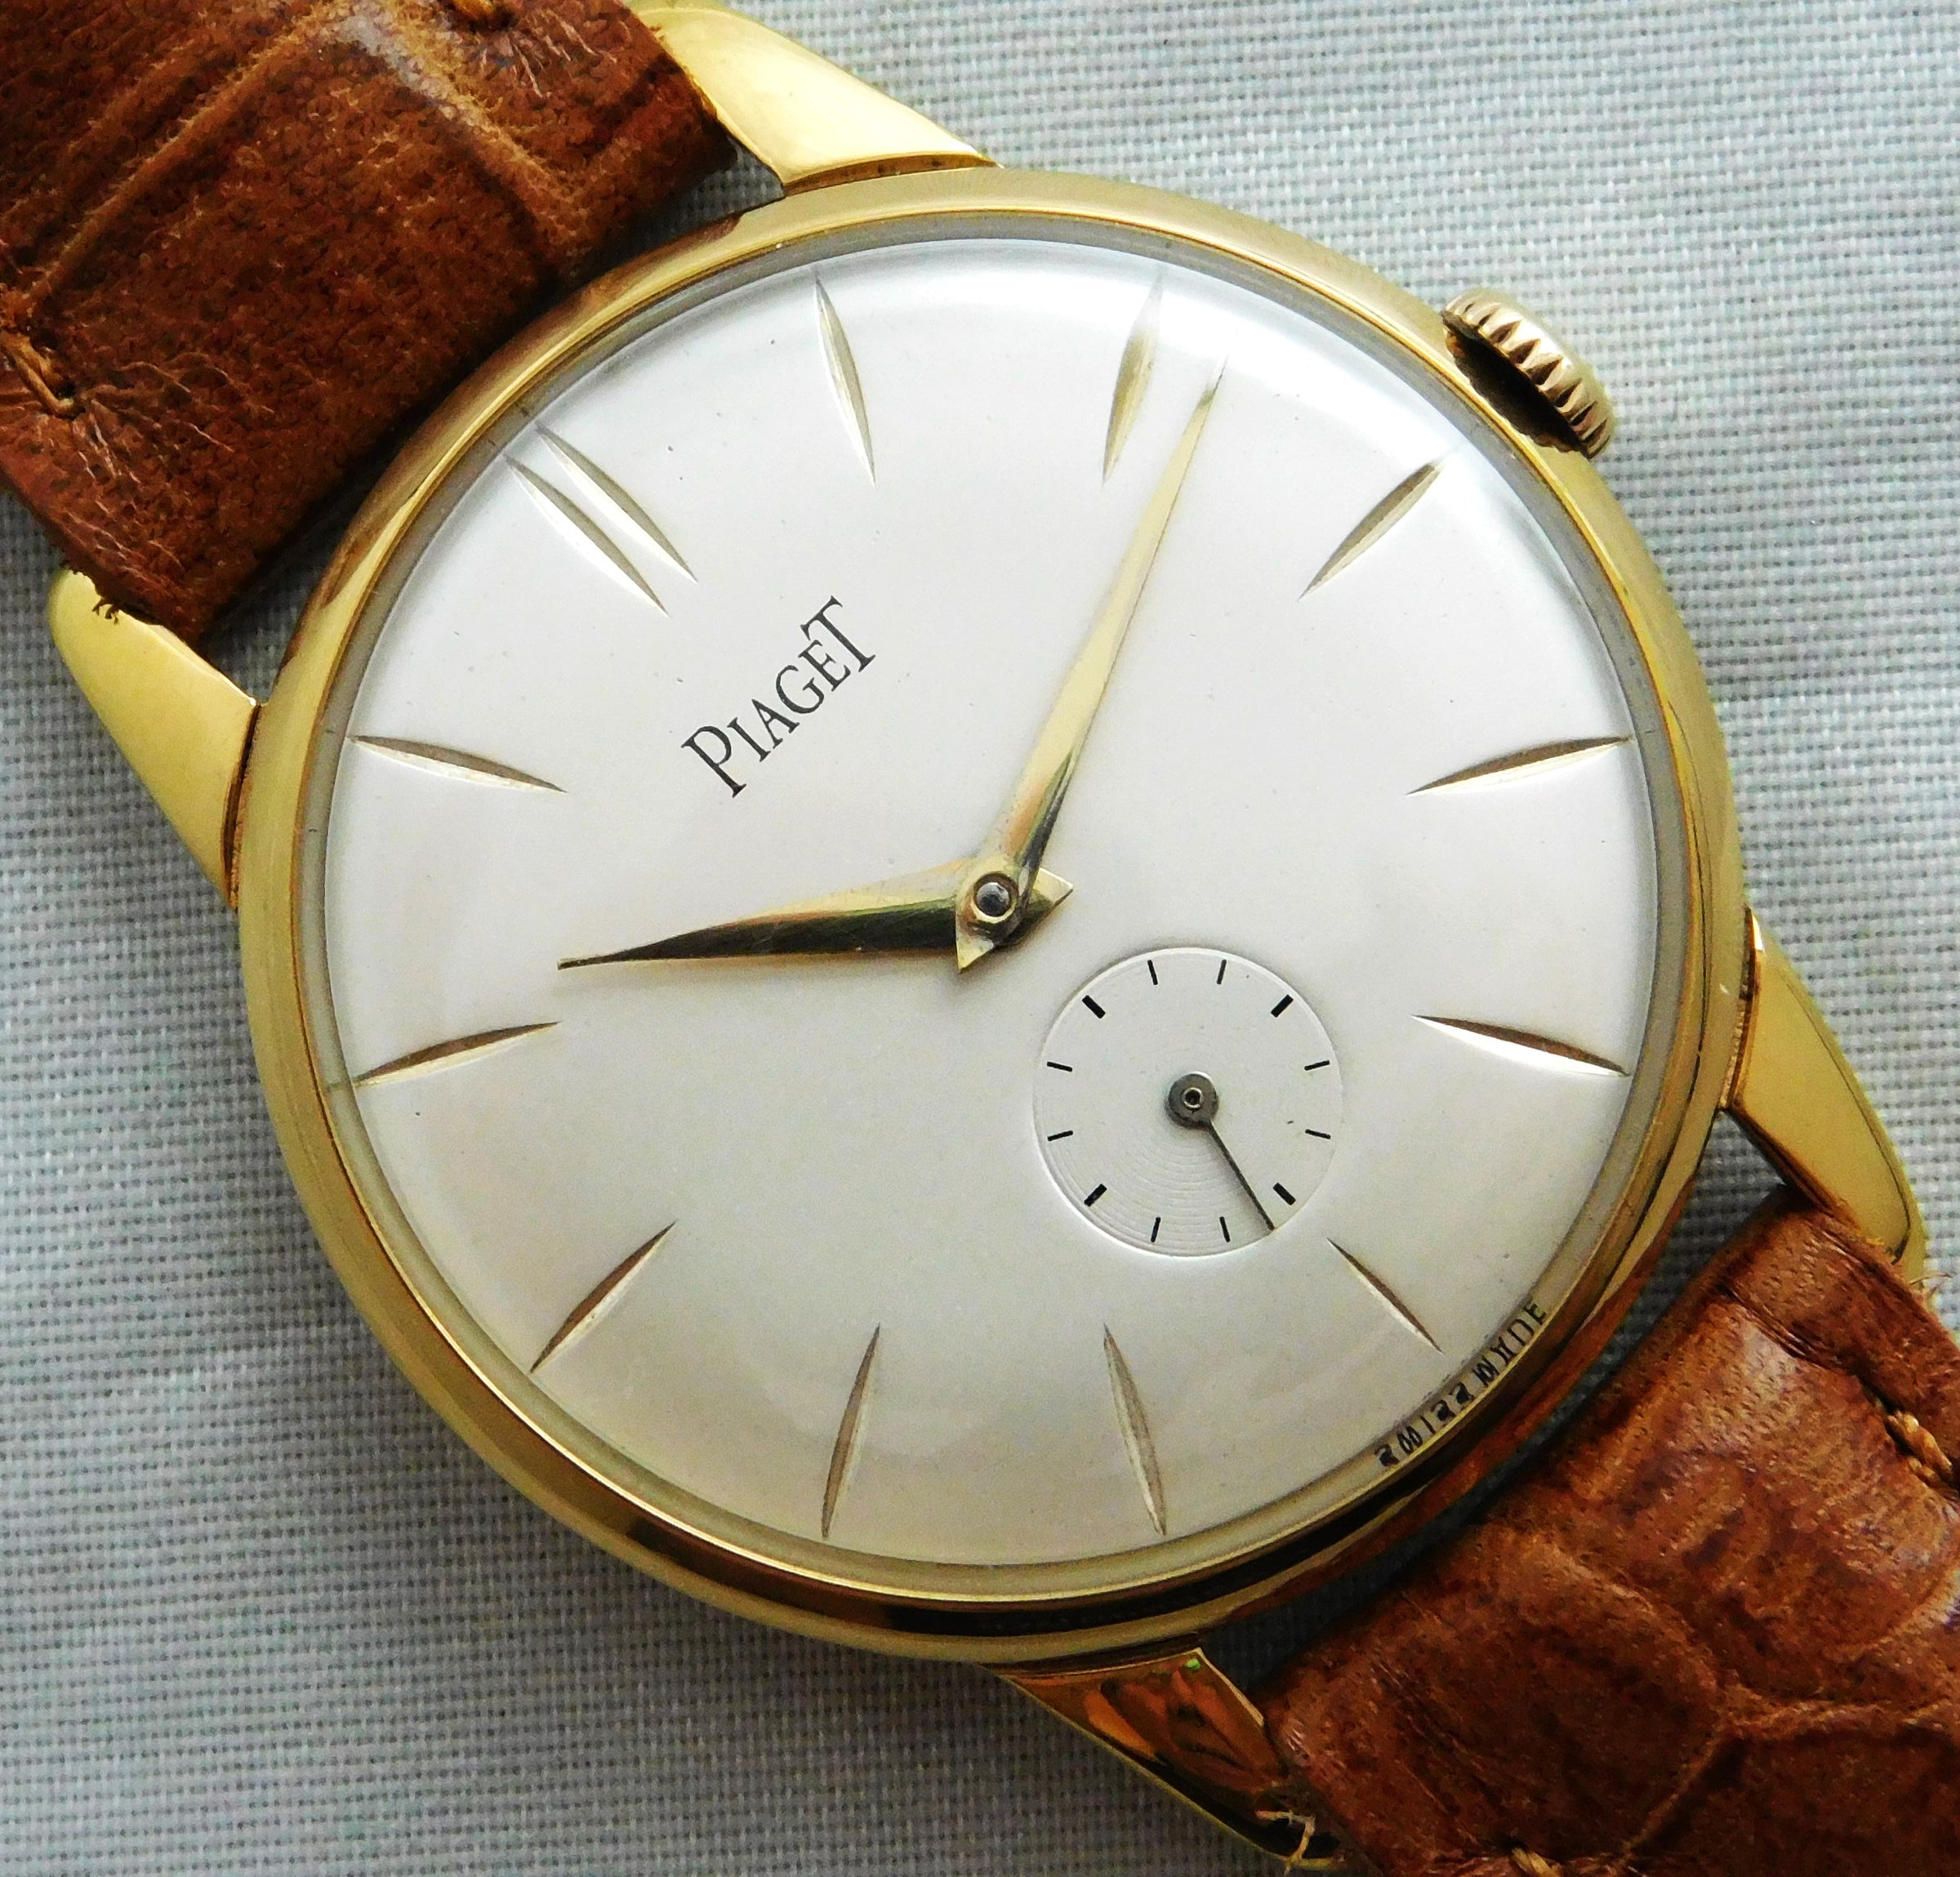 Watches for Men - Piaget Luxury Watches and Jewelry